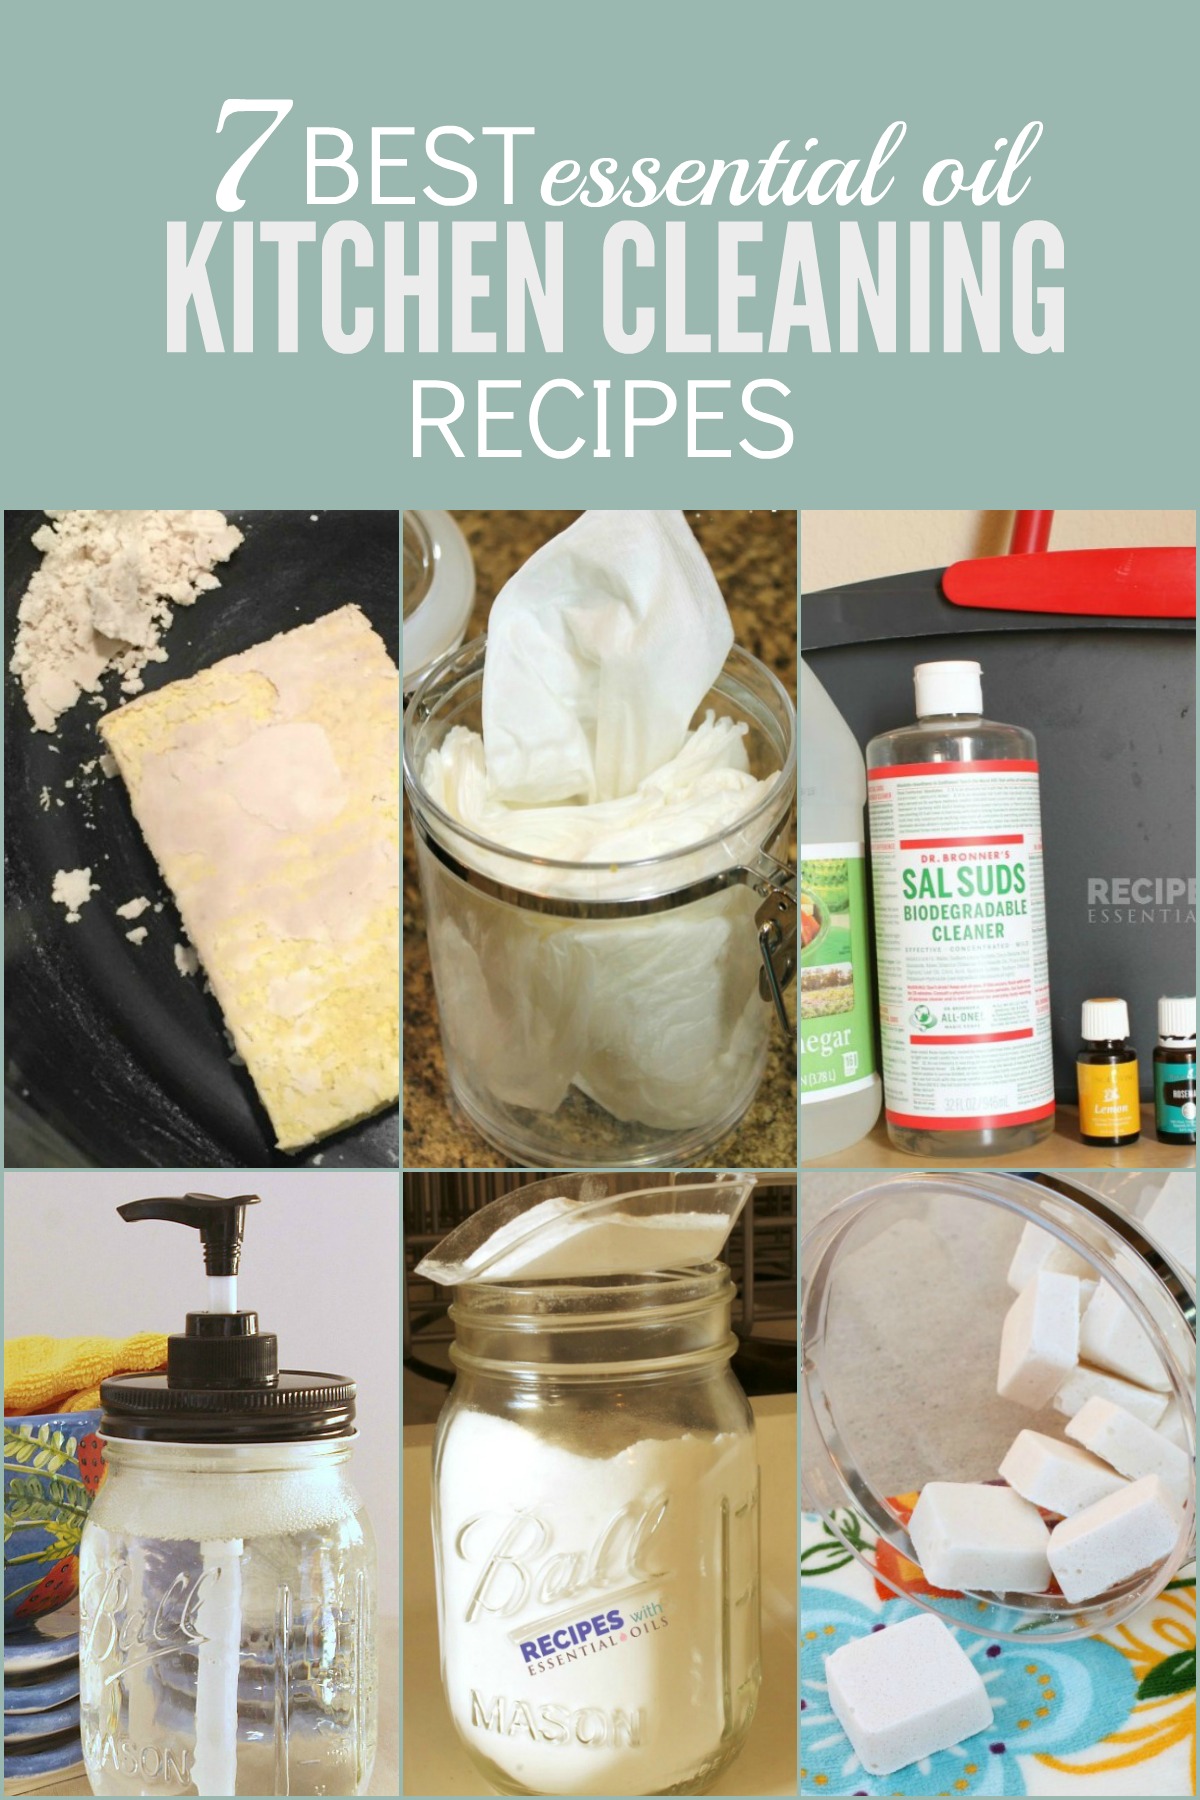 7 Best Essential Oil Kitchen Cleaning Recipes from RecipeswithEssentialOils.com